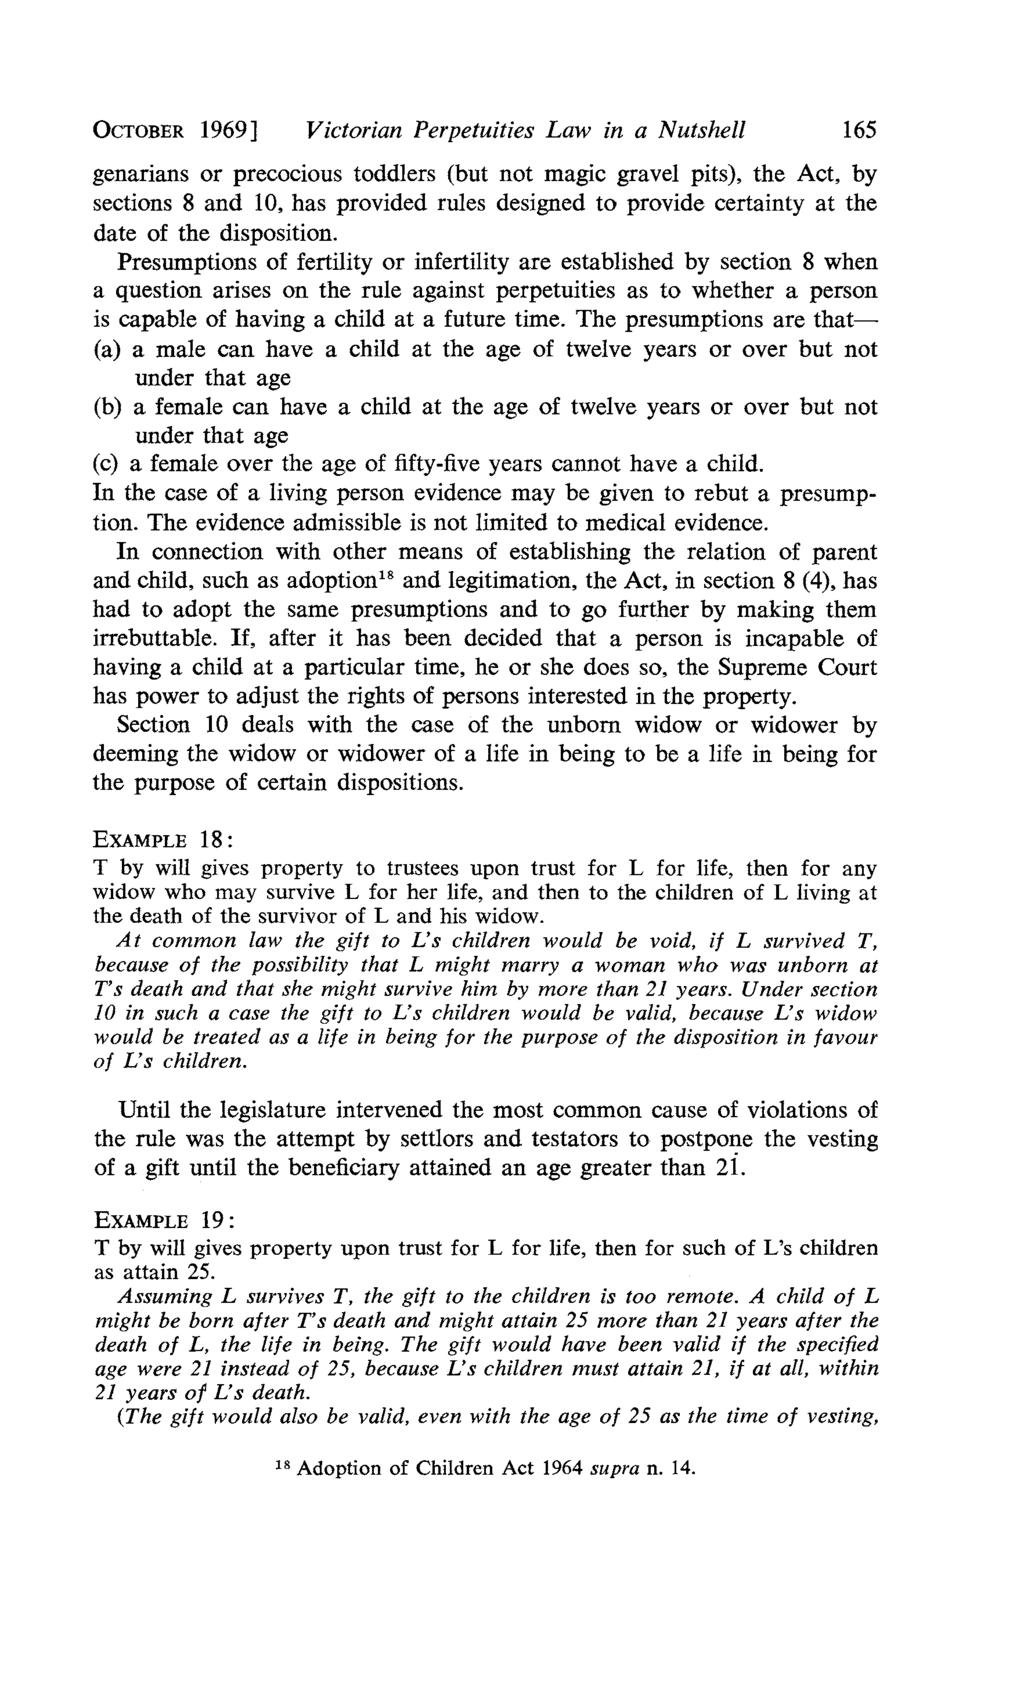 OCTOBER 1969] Victorian Perpetuities Law in a Nutshell 165 genarians or precocious toddlers (but not magic gravel pits), the Act, by sections 8 and 10, has provided rules designed to provide